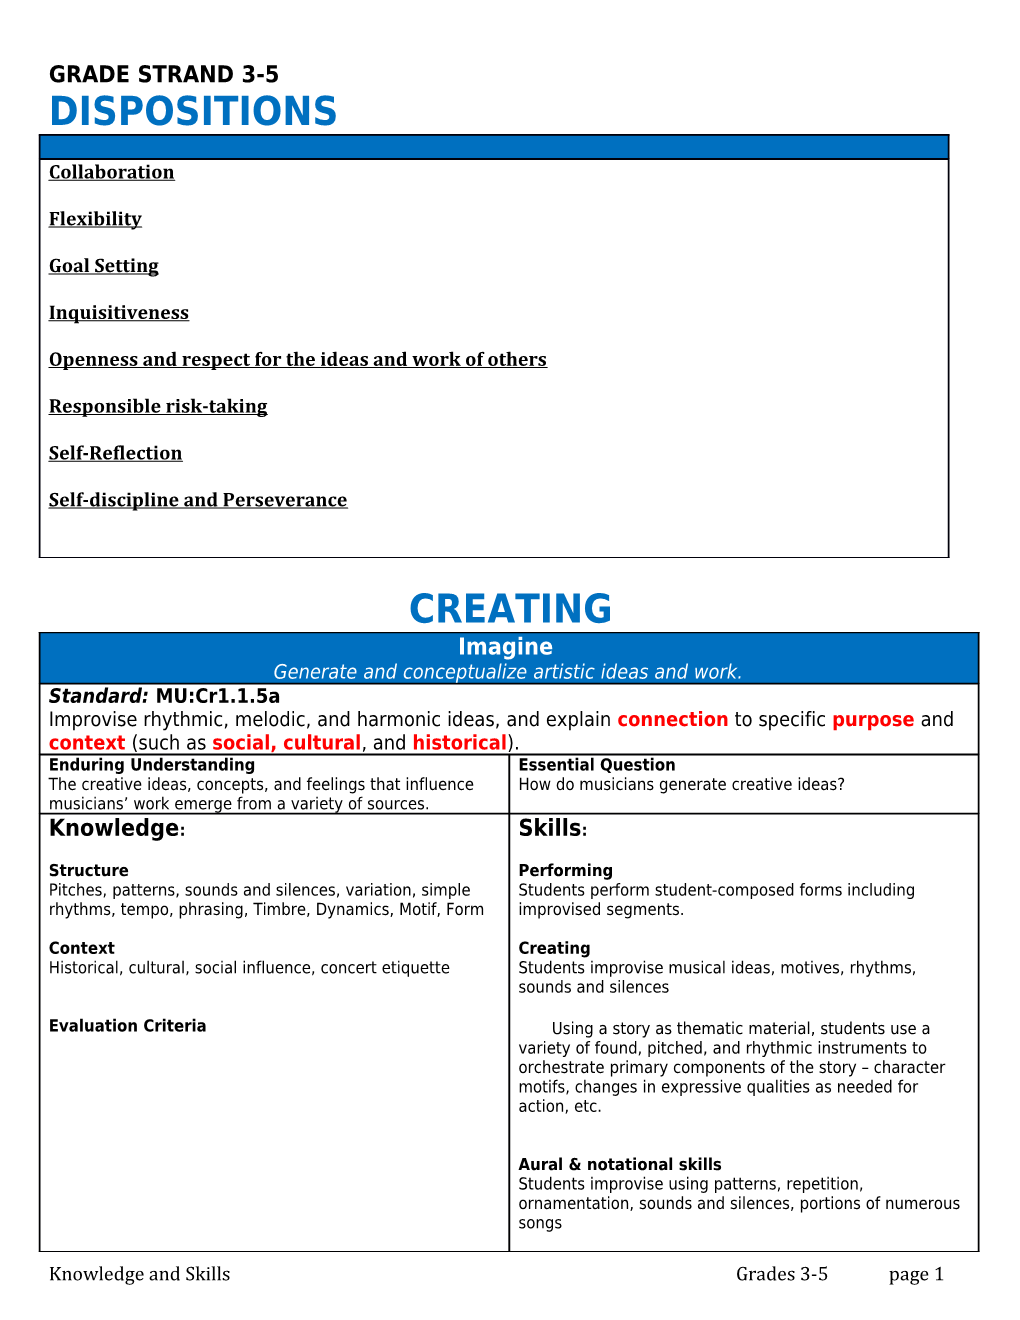 Knowledge and Skillsgrades 3-5Page 1